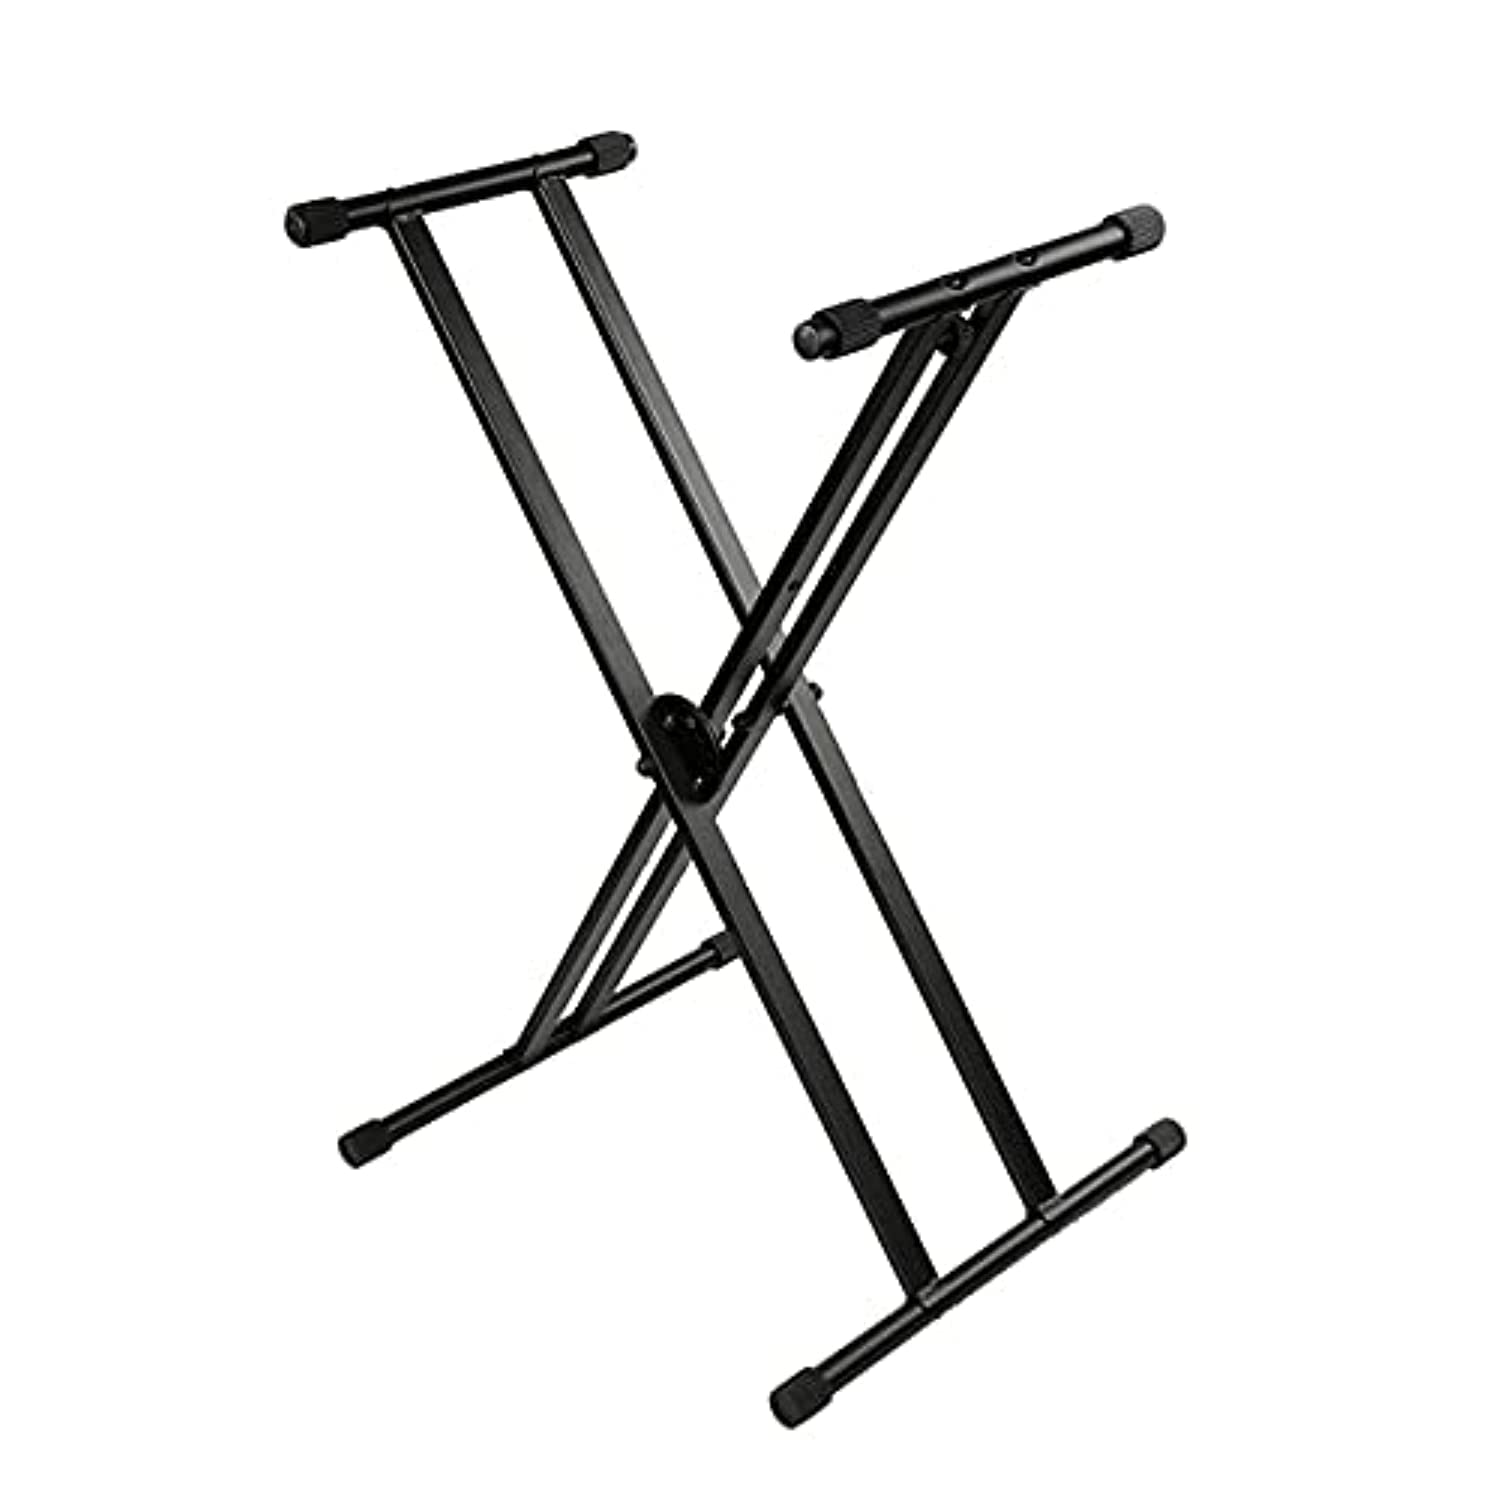 Soundking DF007 Keyboard Stand